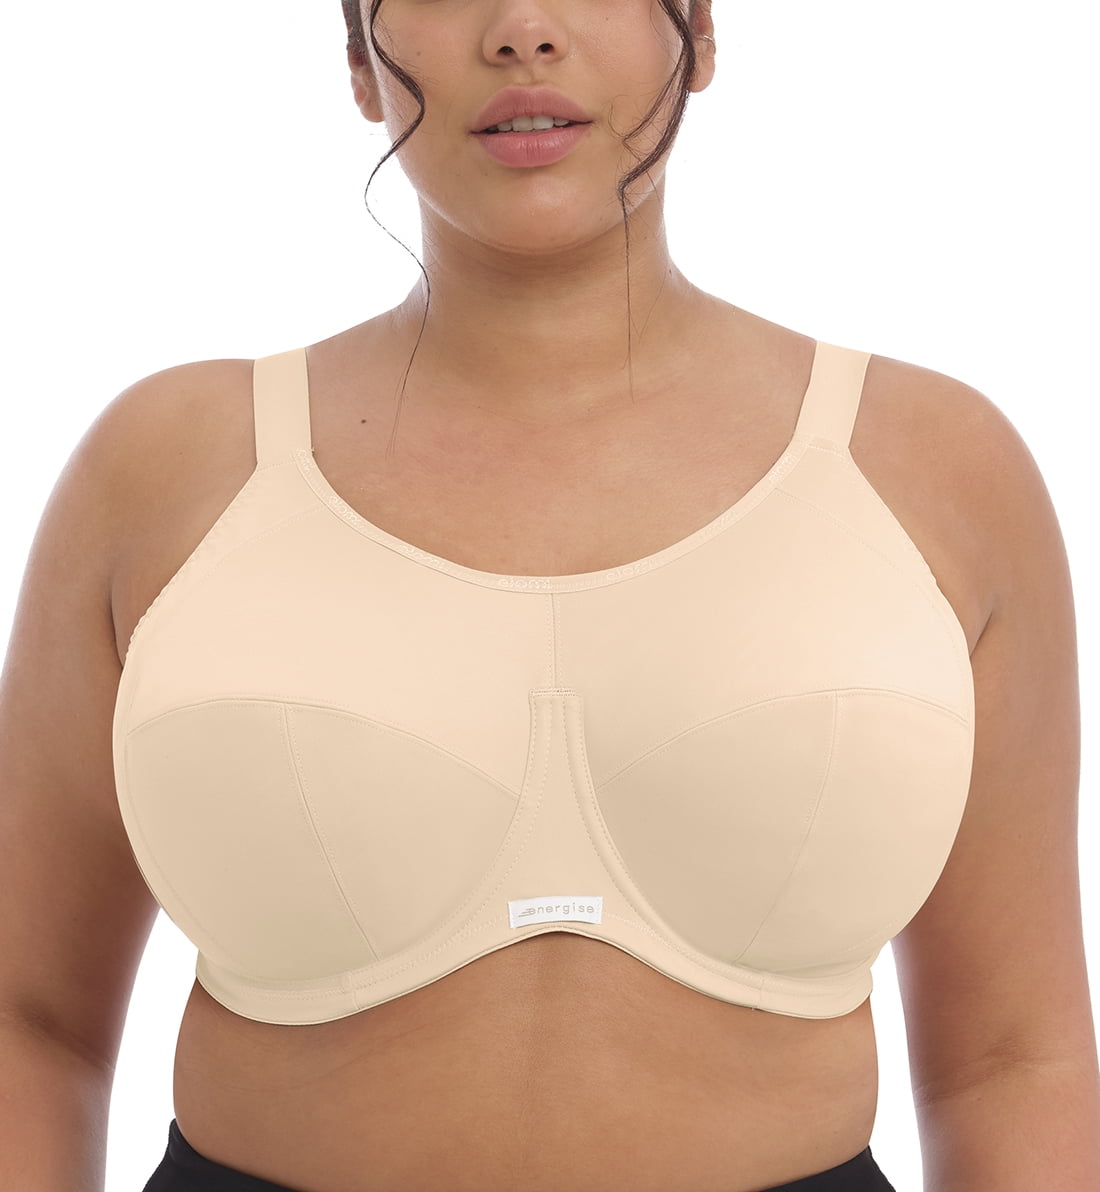 618 - Microfiber Push-Up bra wide shoulder top band with breast